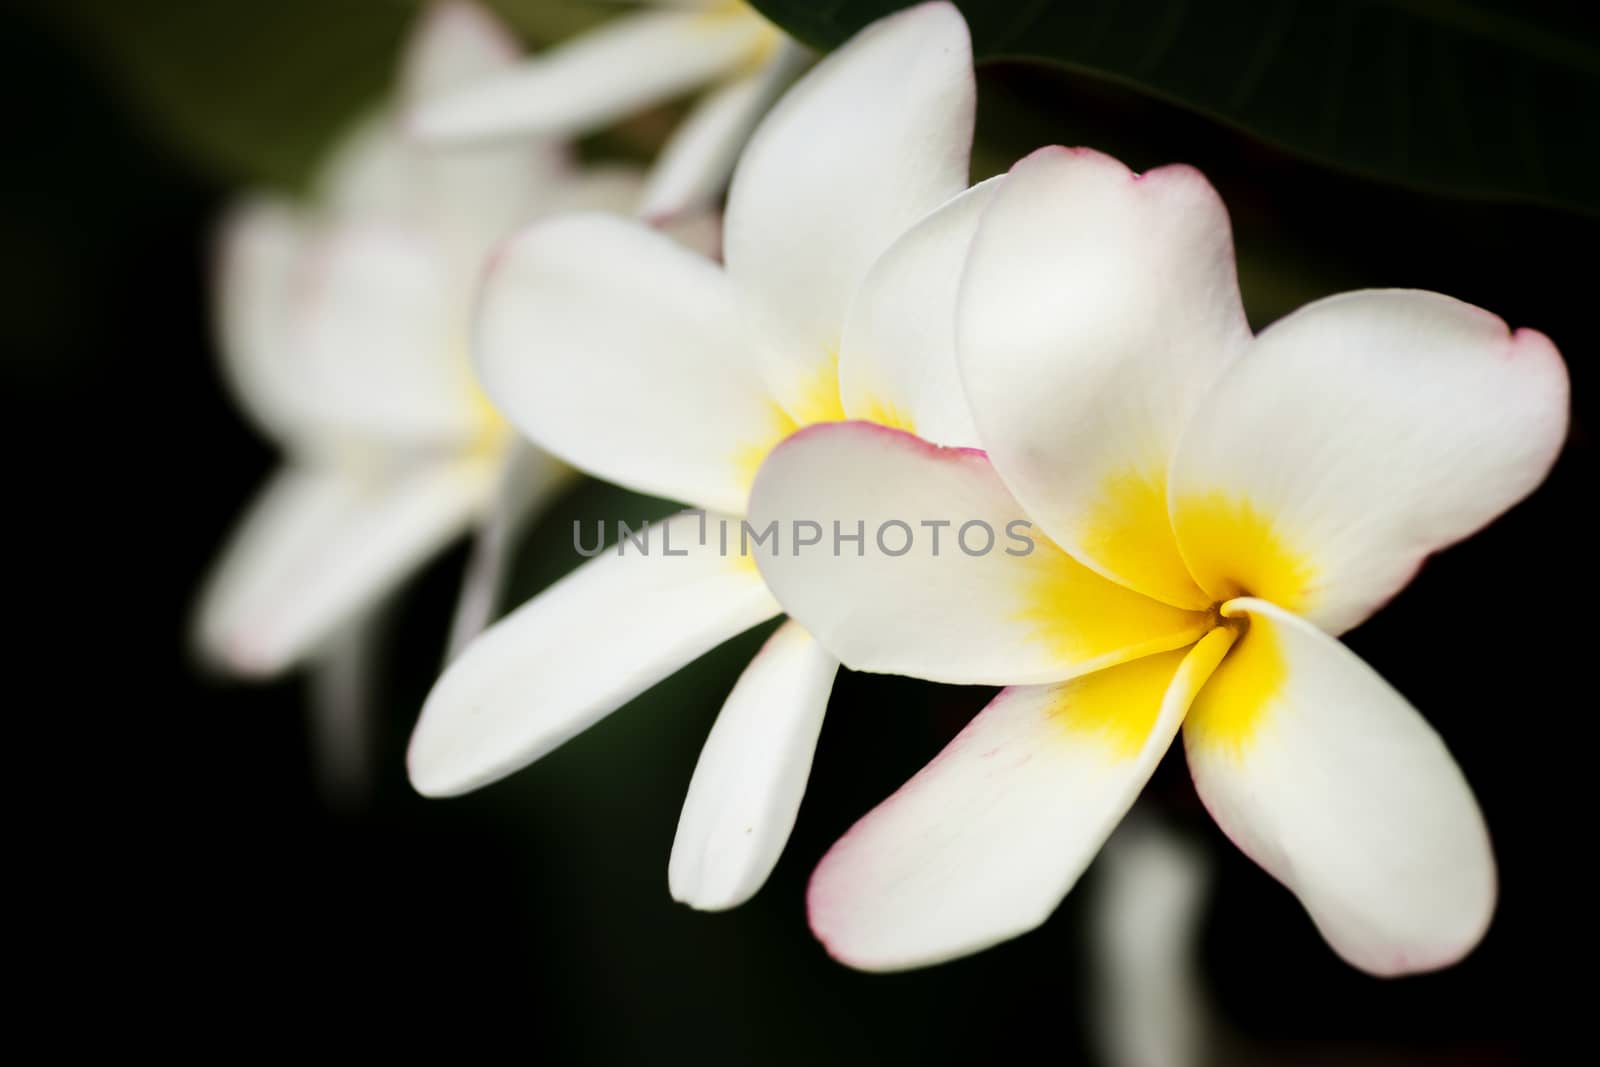 Four blossom frangipani (Plumeria) flowers are beautiful lined on the branches. Depth of Field. frangipani flowers background for spring and summer season. isolated on black background by asiandelight